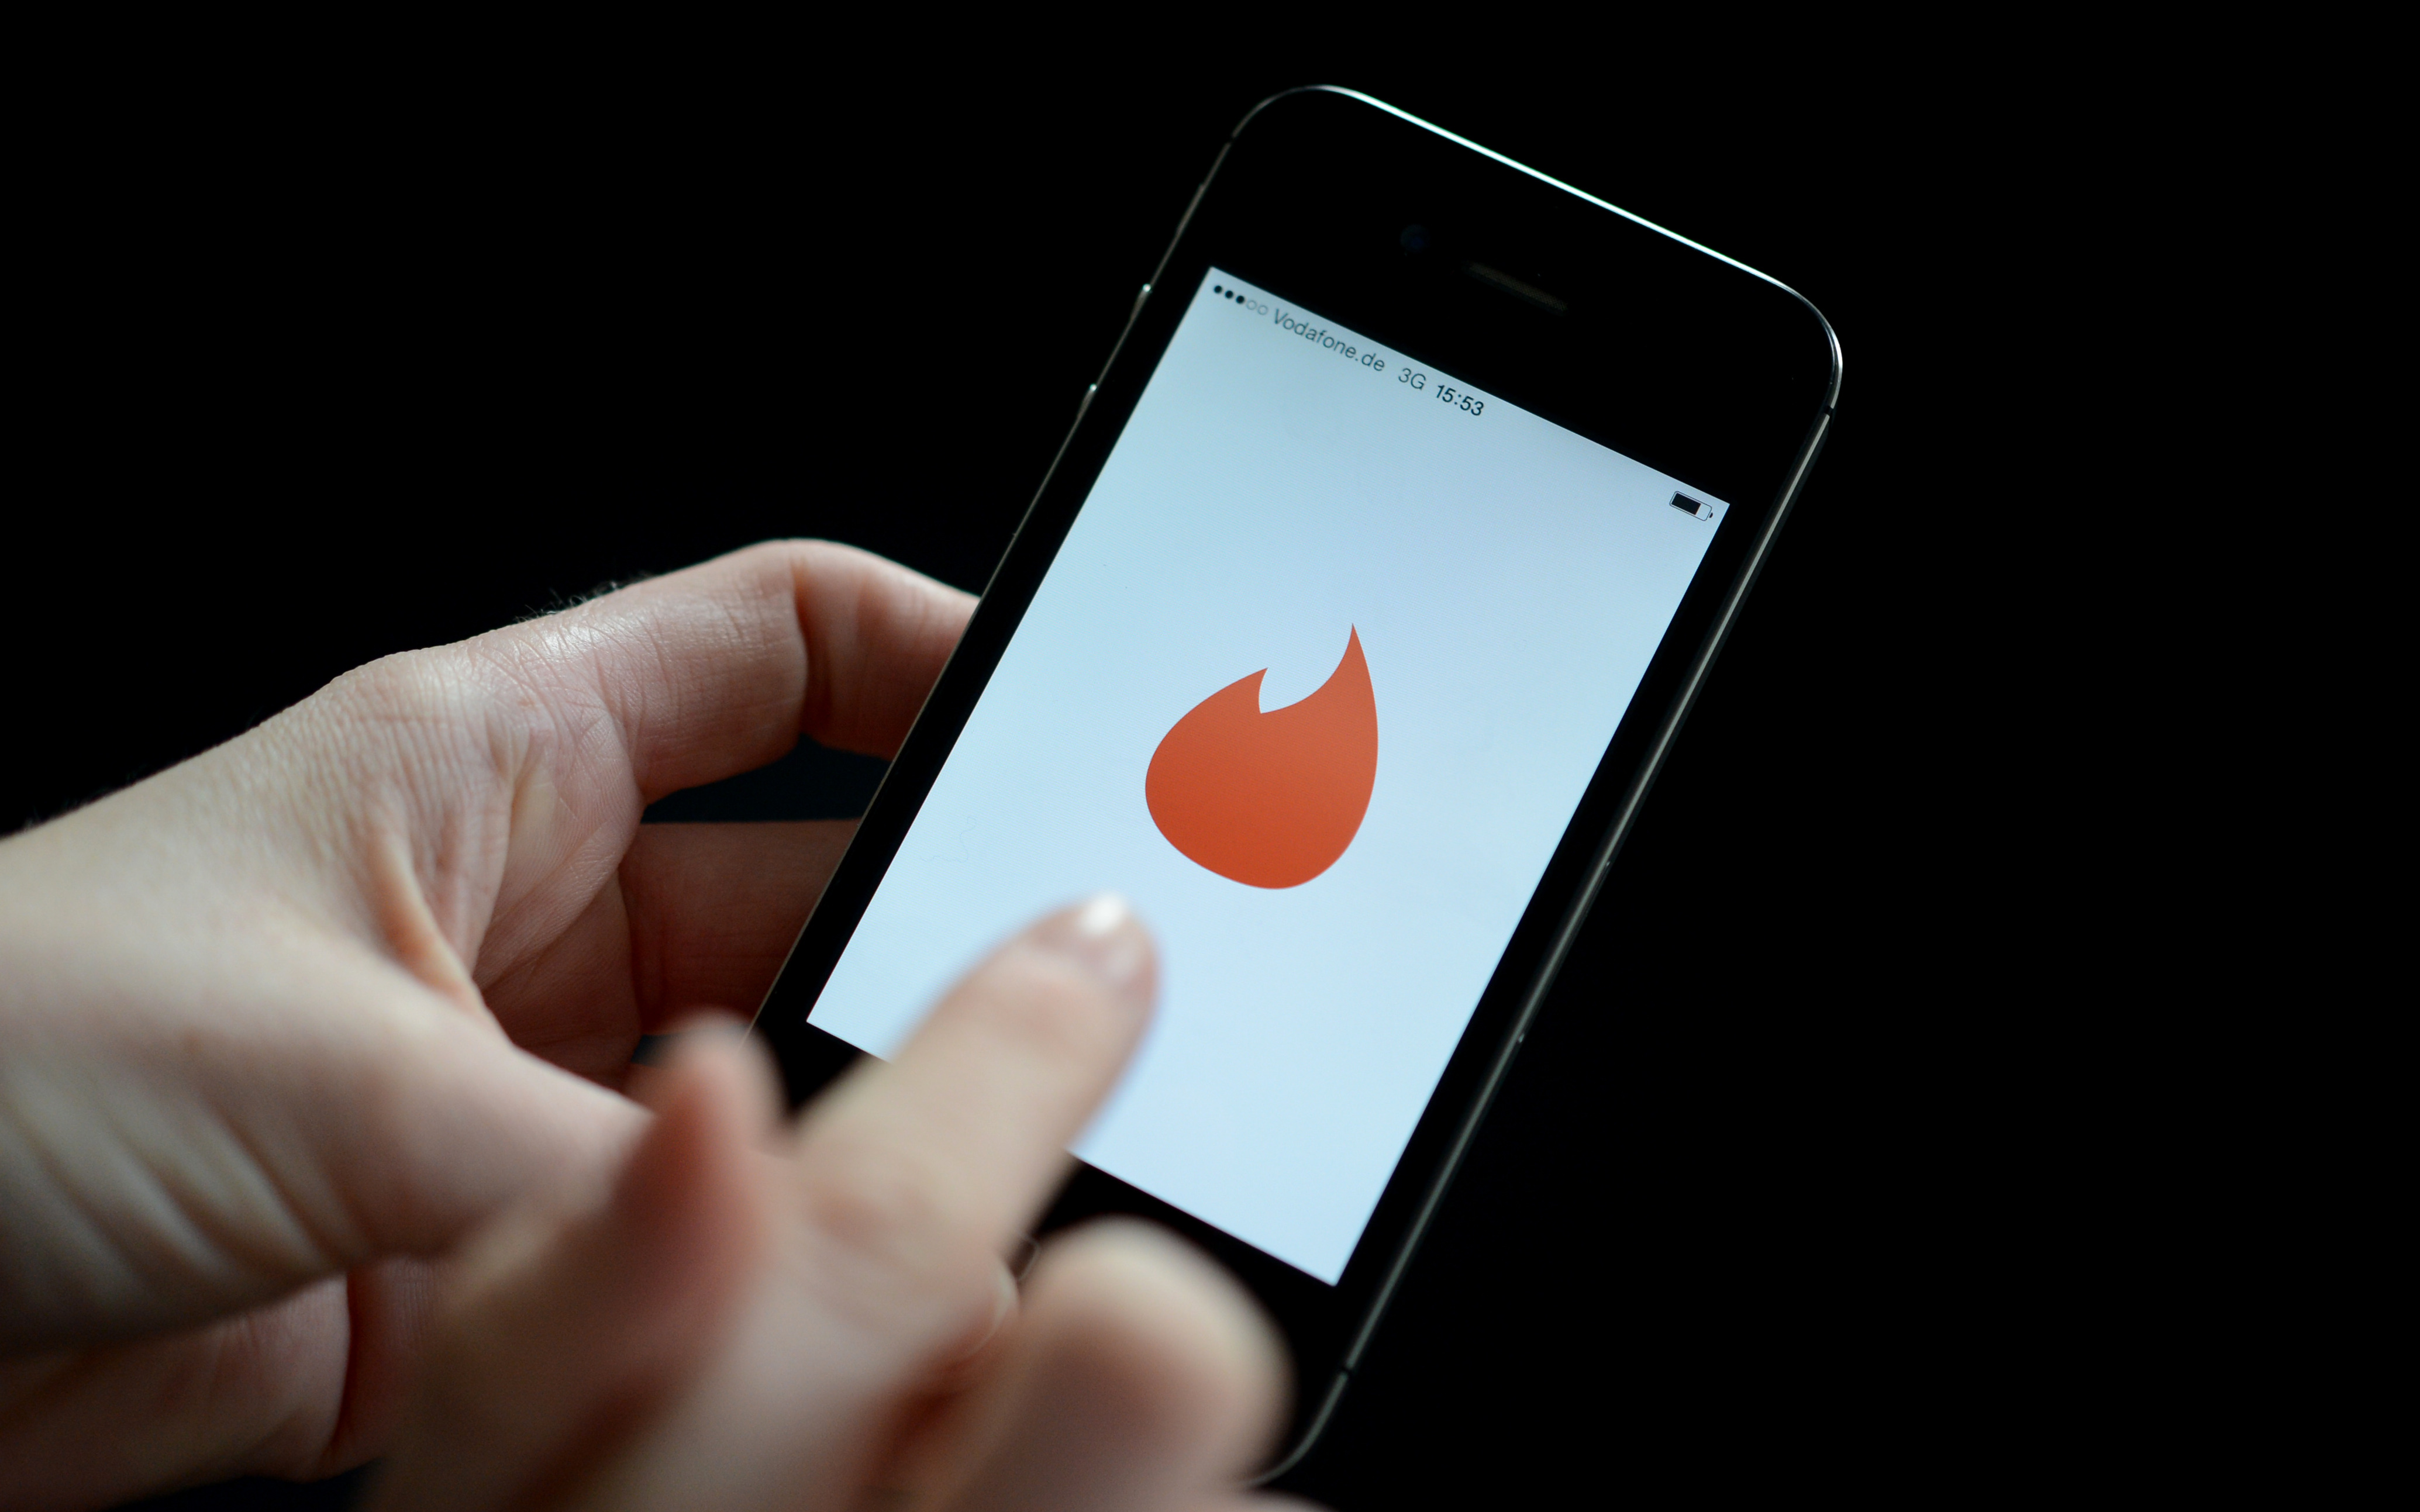 Nows who tinder right swipe 28 Fascinating